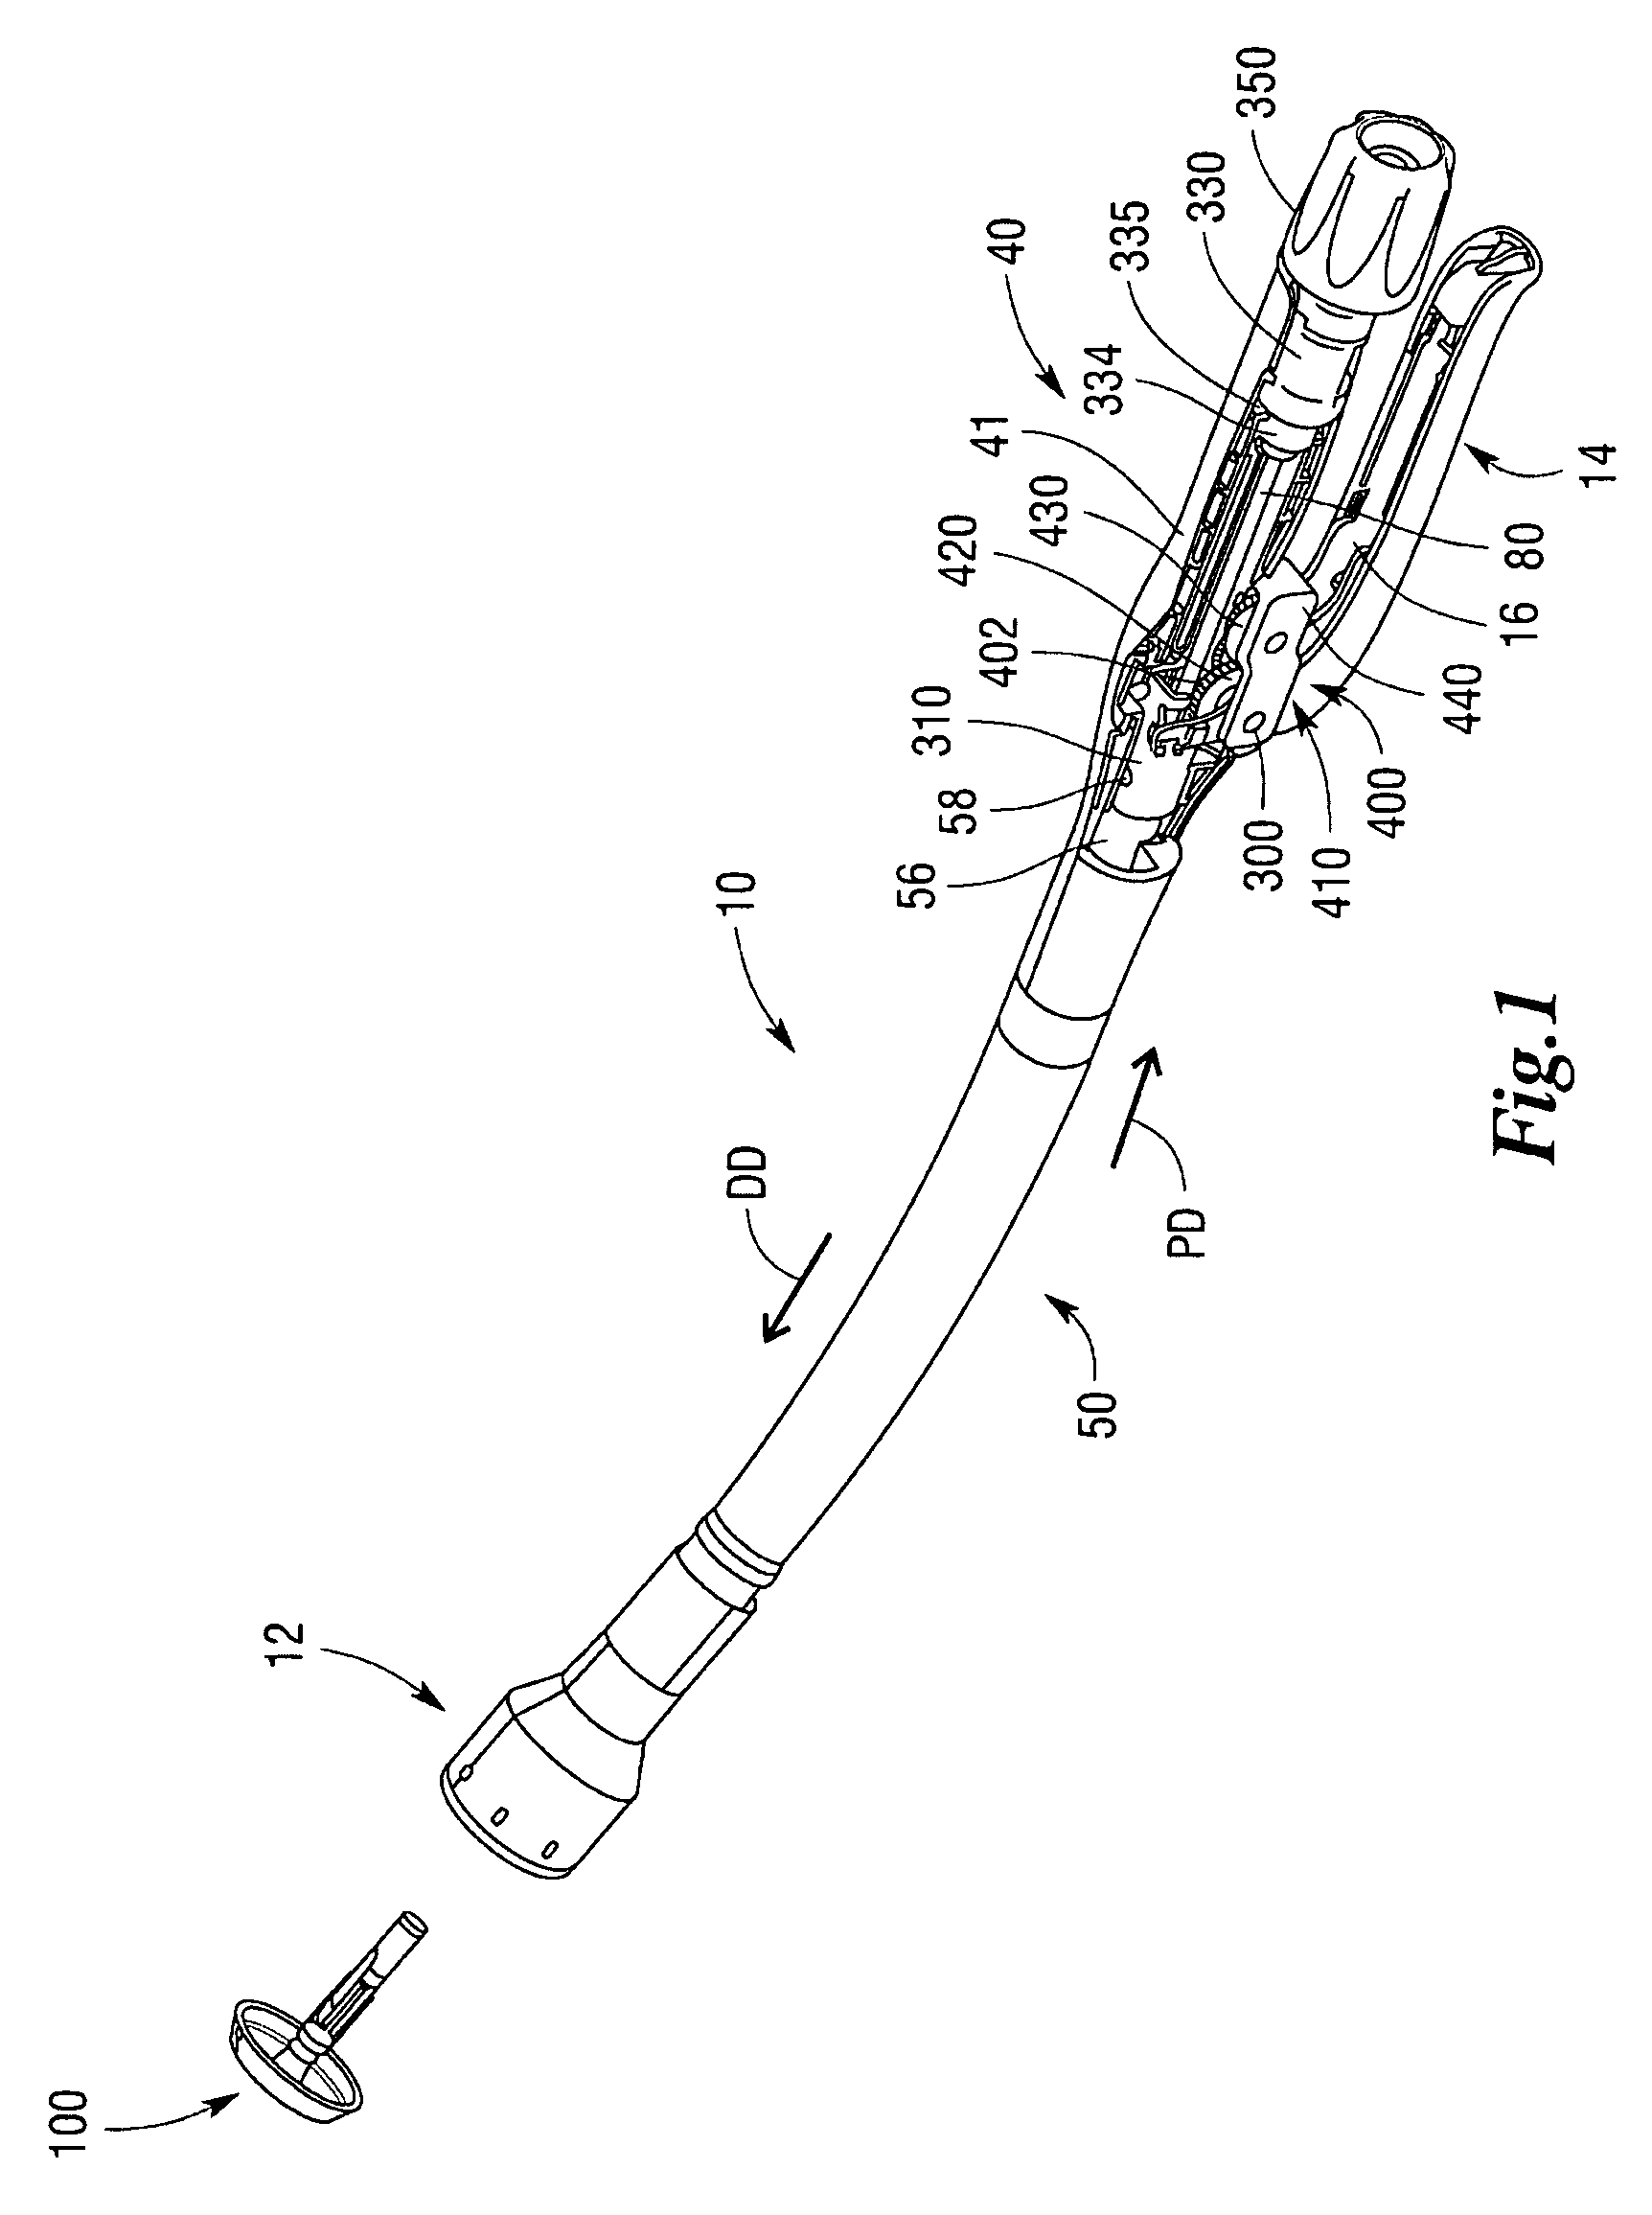 Circular surgical stapling instrument with anvil locking system